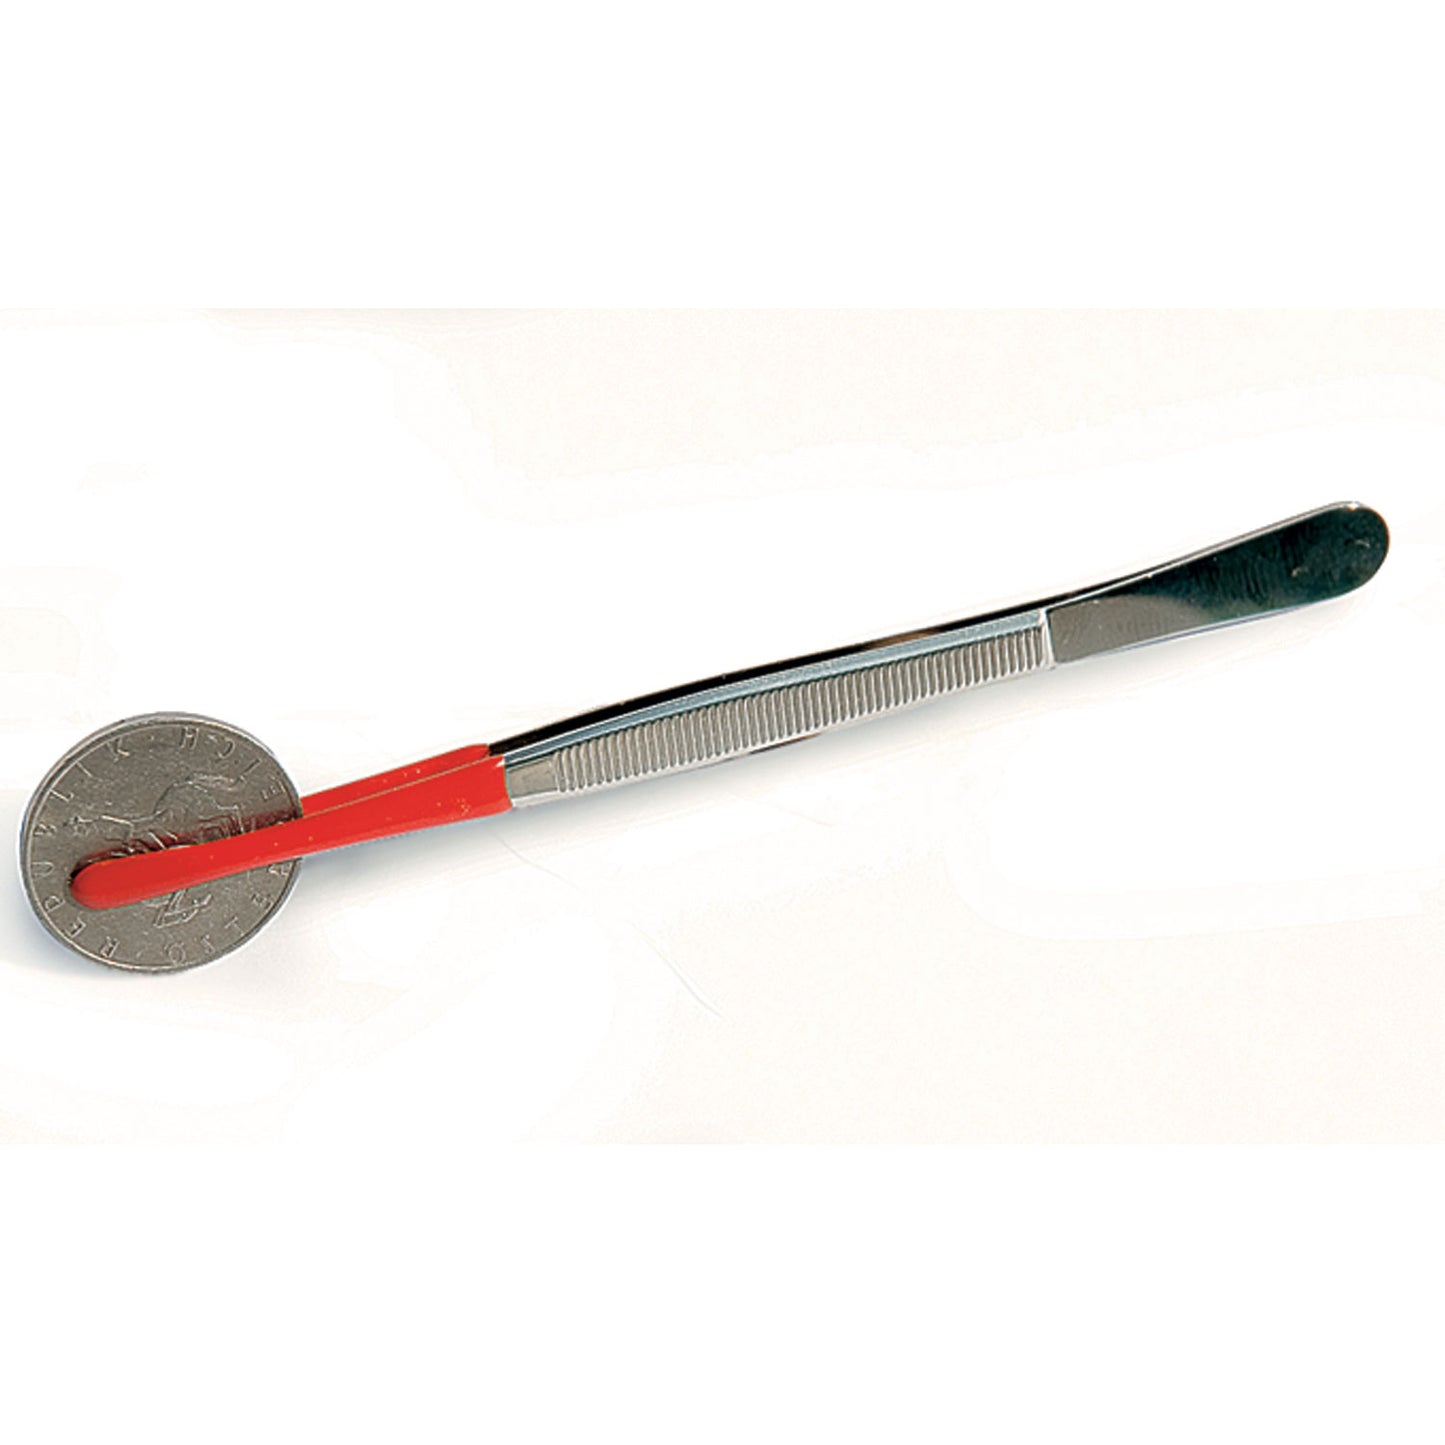 Prinz Coin tweezers (spoon) with cover